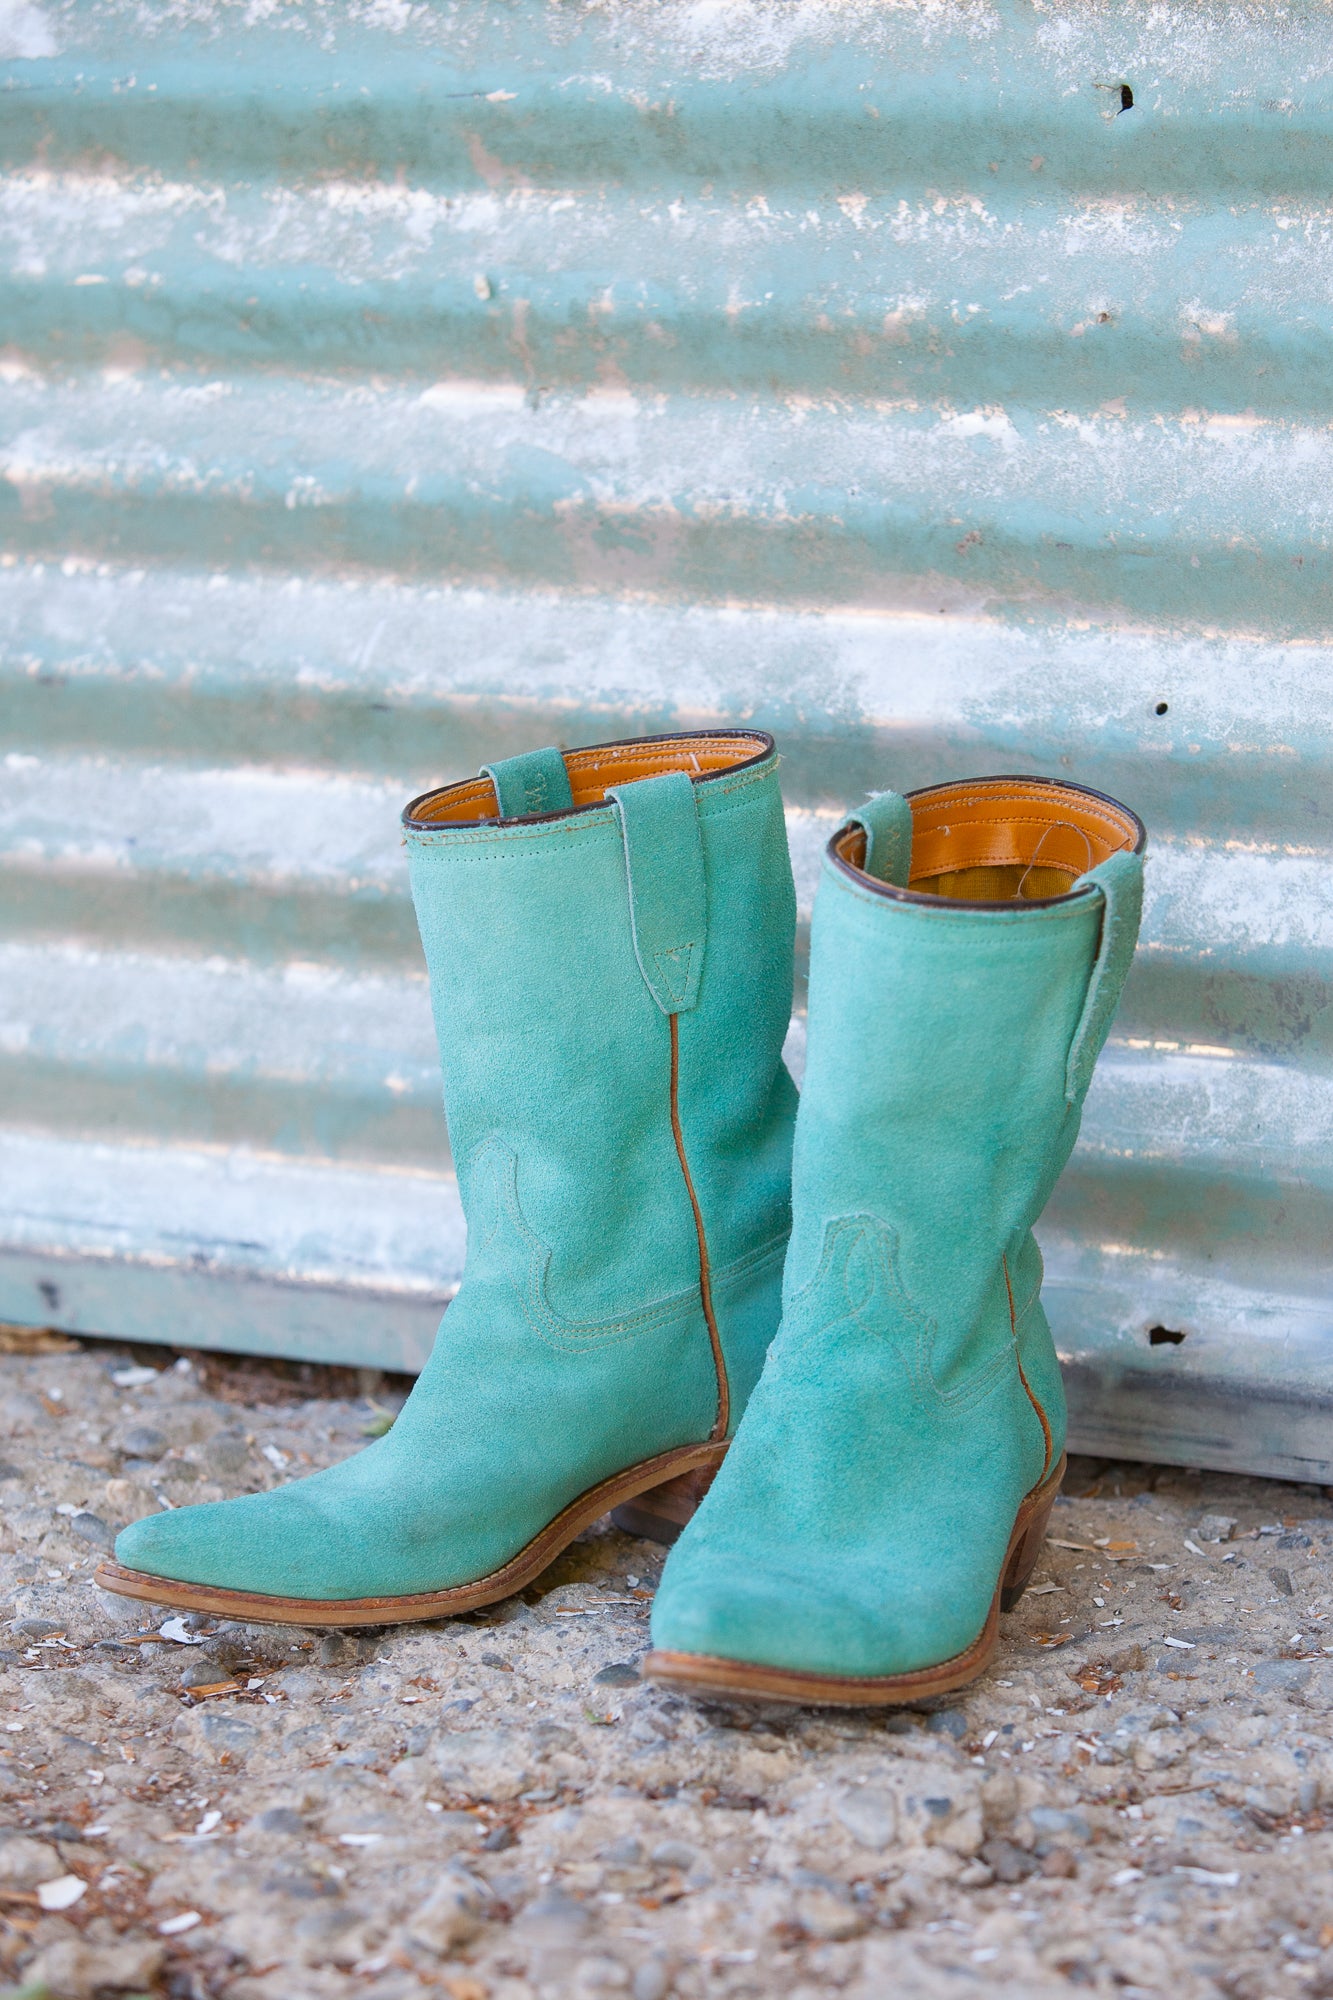 Wrangler Cowgirls boots in Aqua Suede by JULES FRAZIER